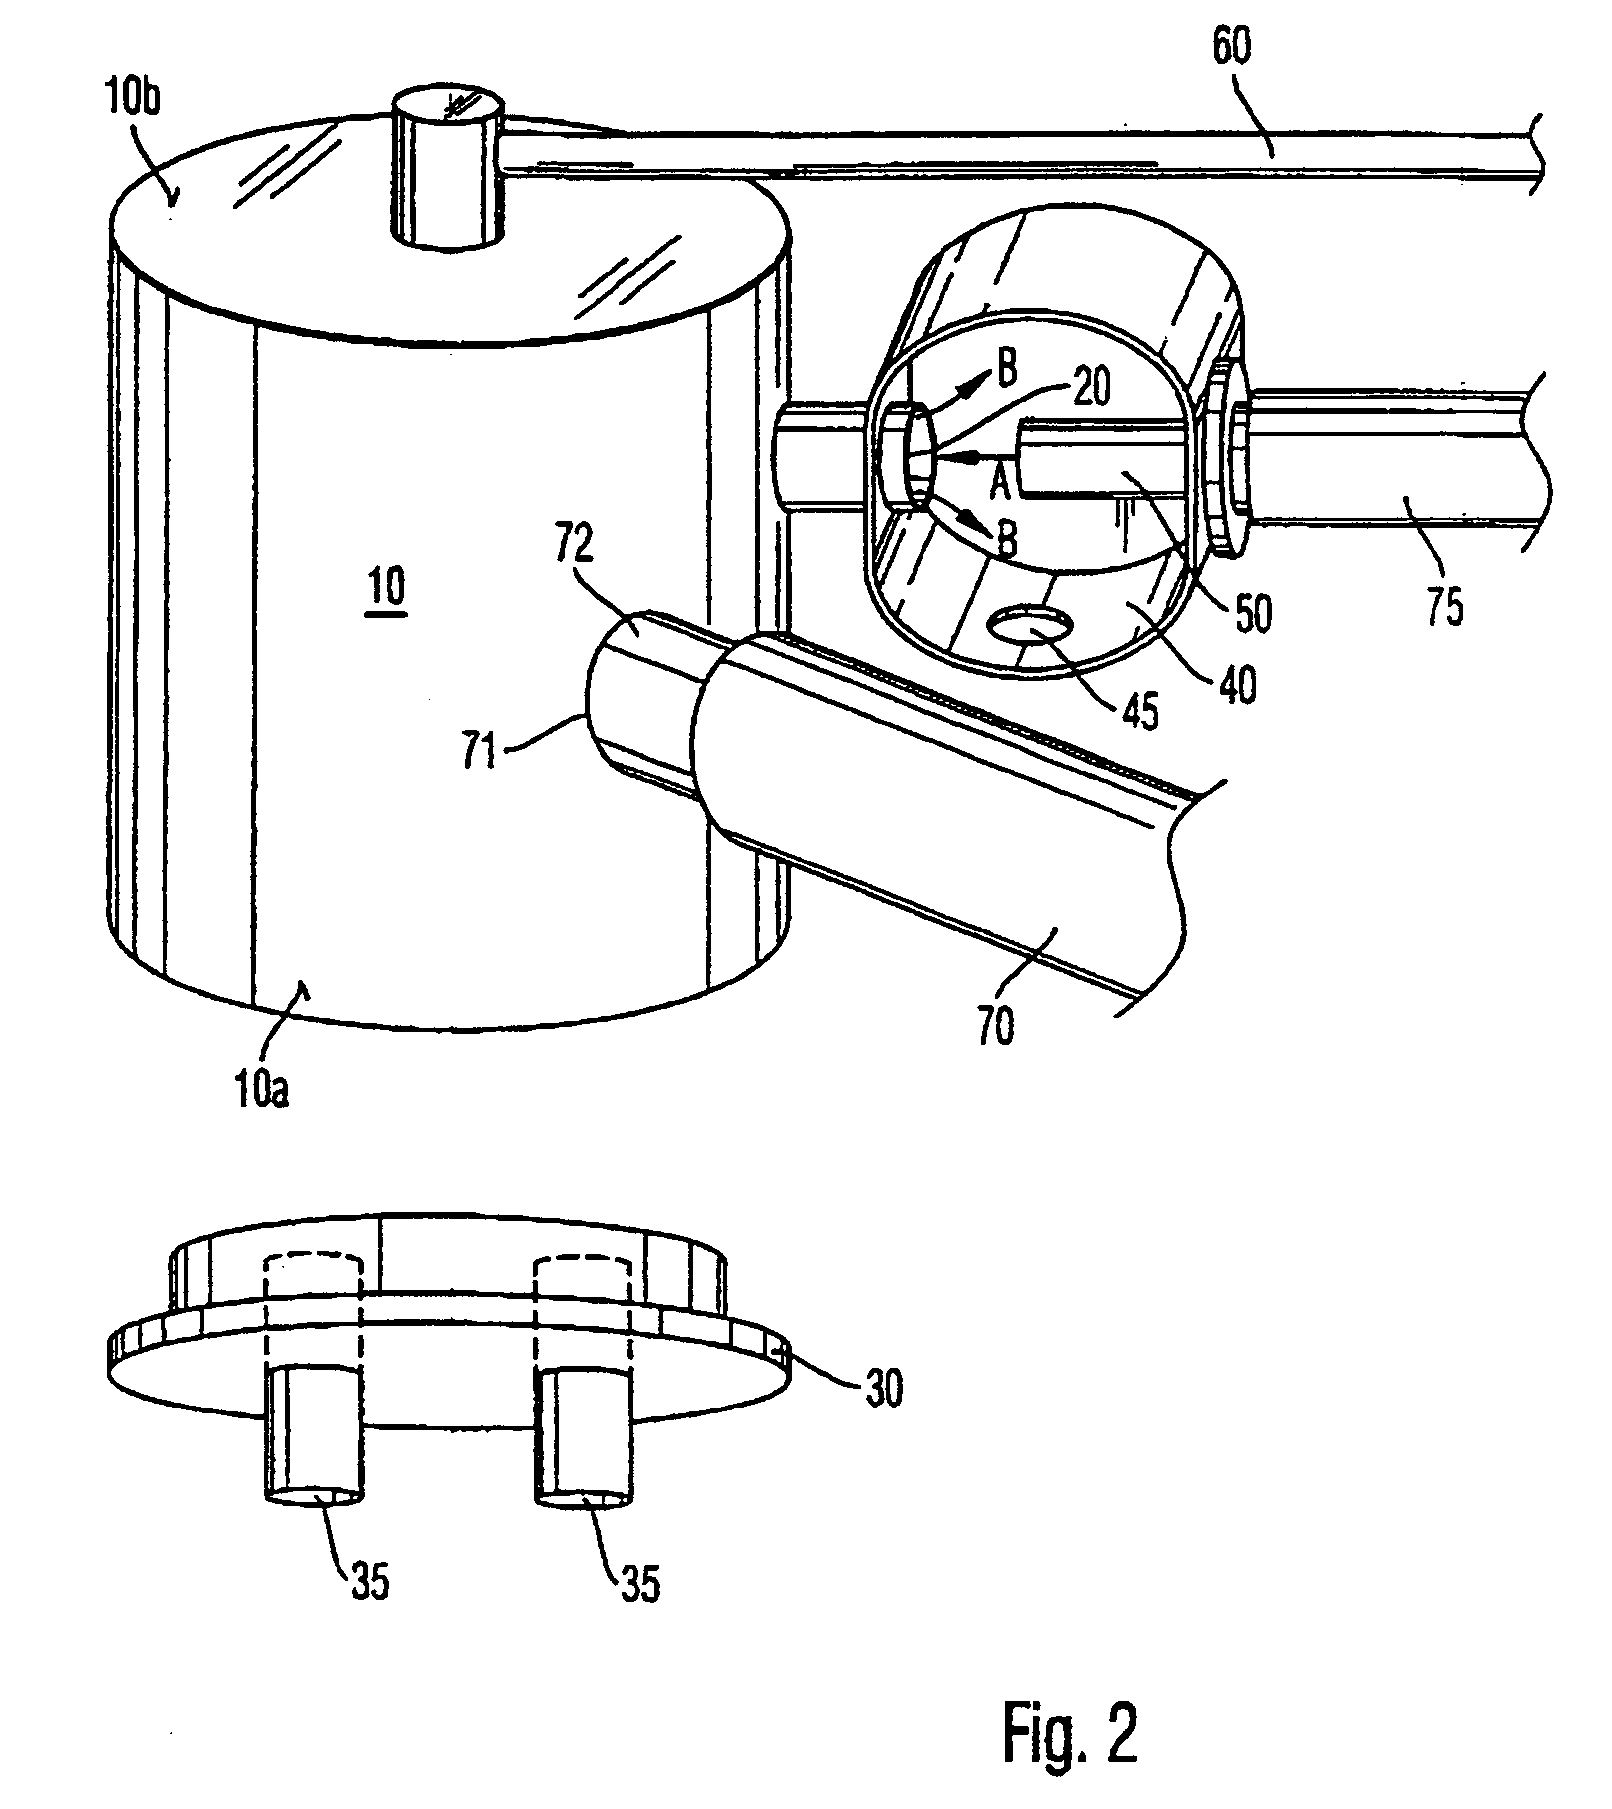 Device for generating a continuous positive airway pressure (CPAP device)